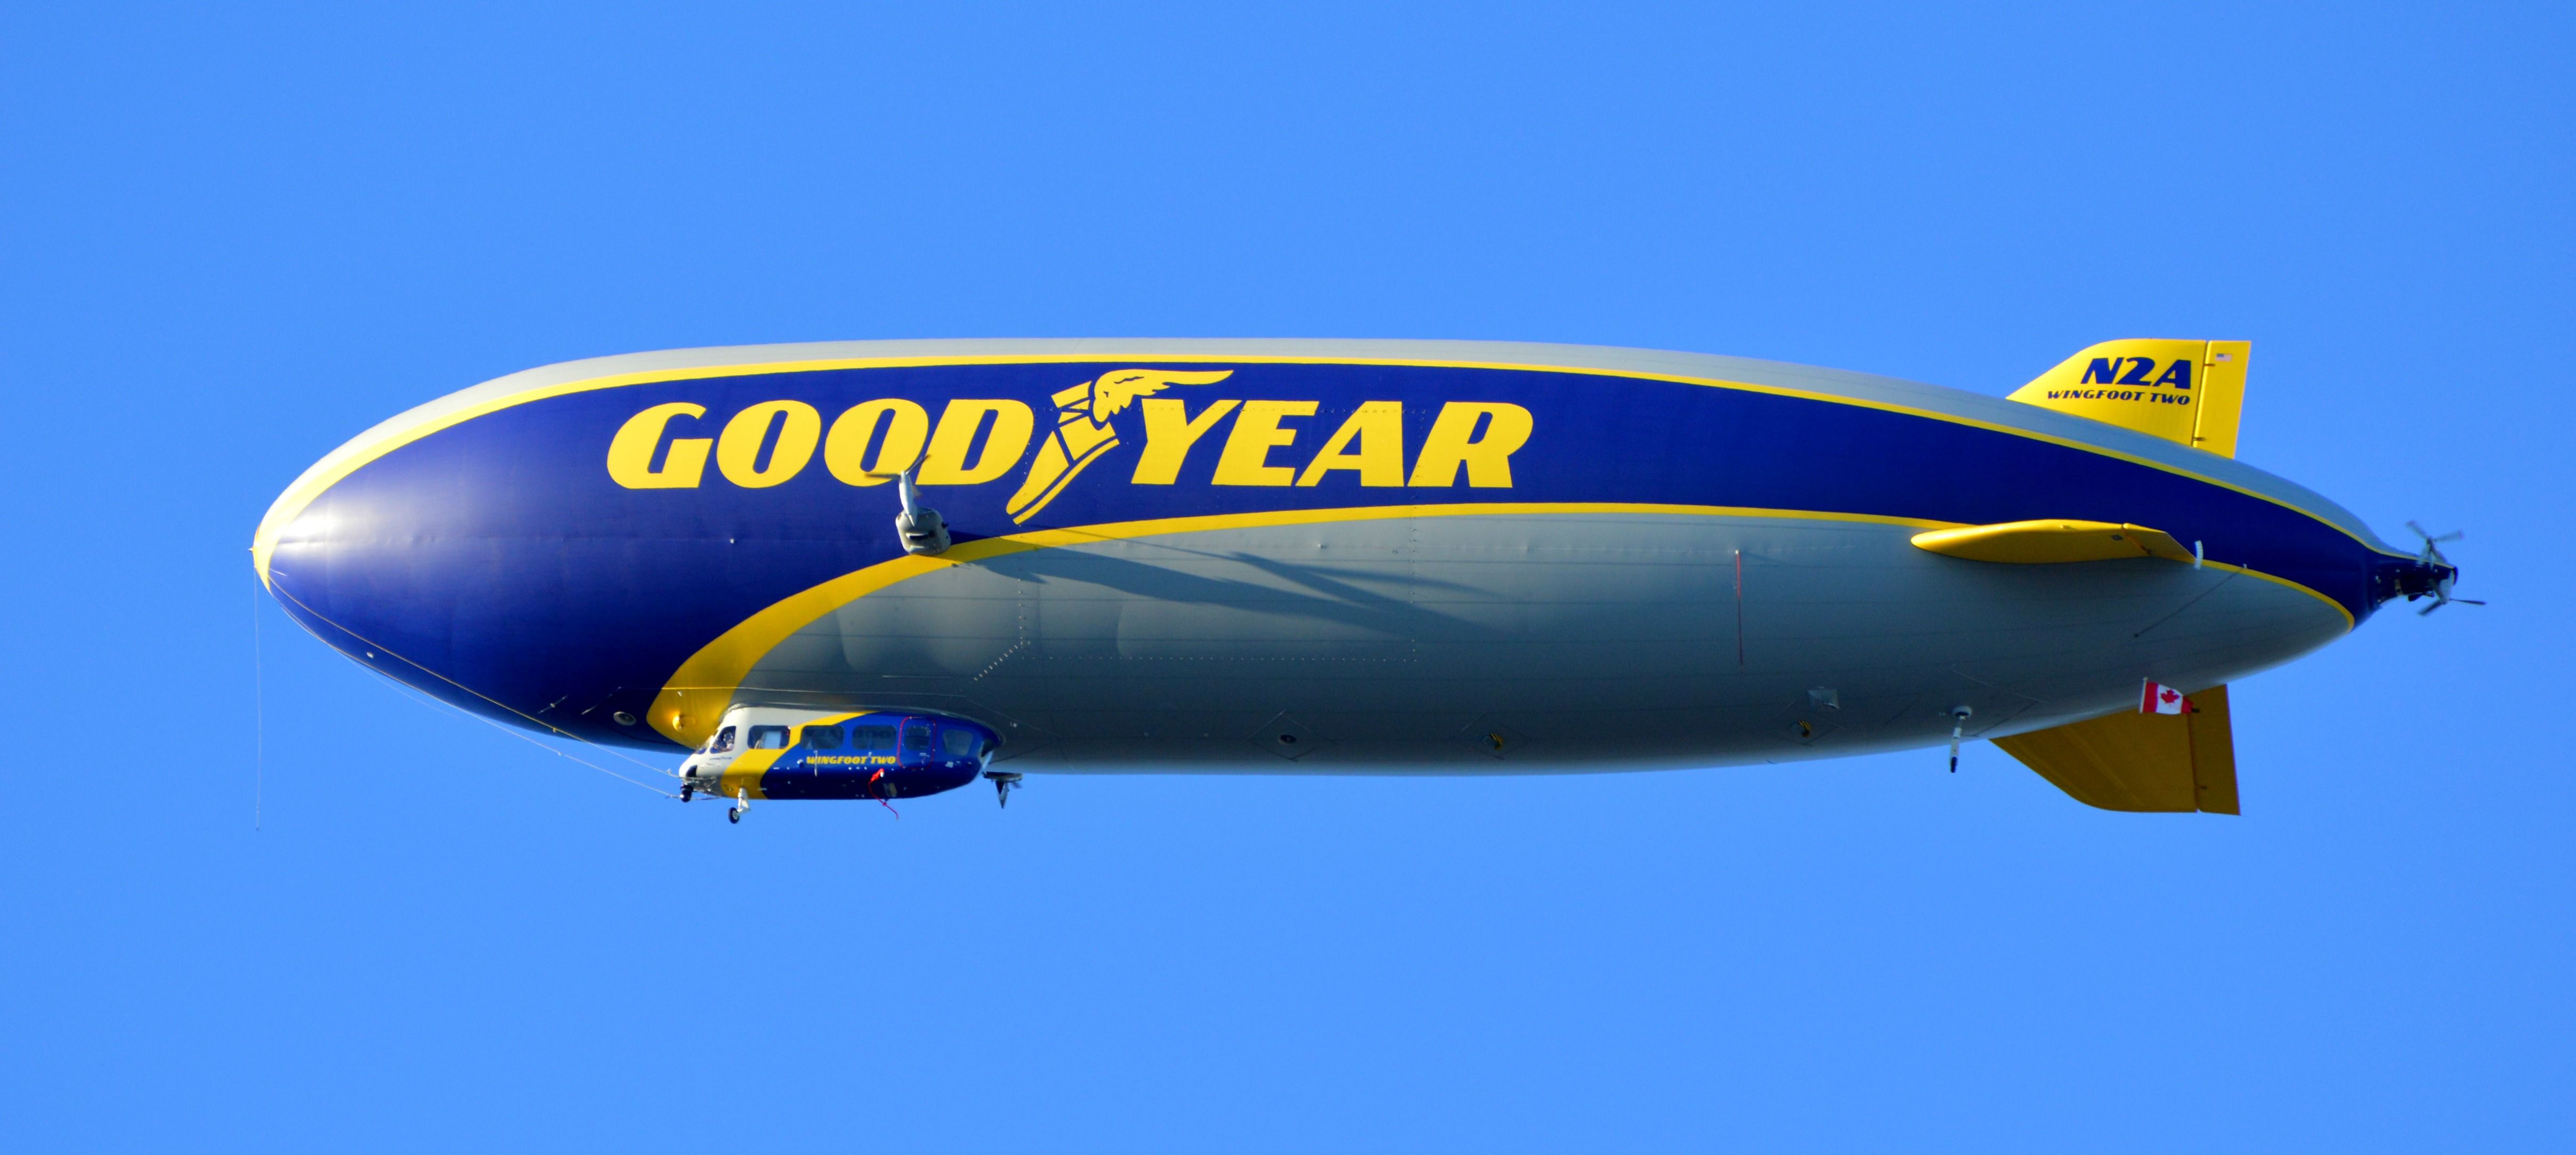 Goodyear Wingfoot Blimp with canadian flag